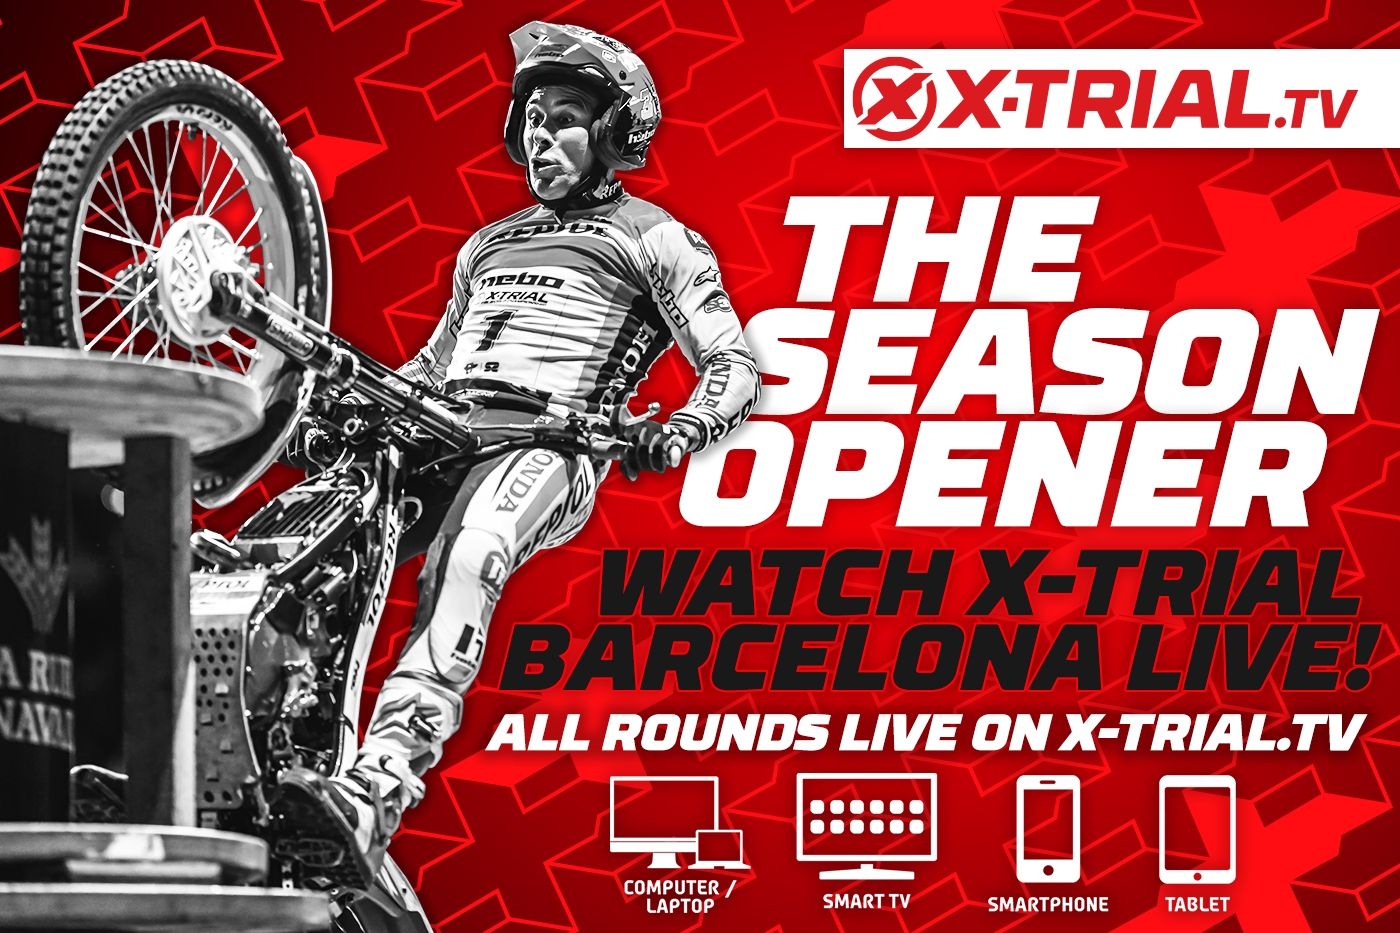 Follow X-Trial live with the X-Trial.tv Video Pass